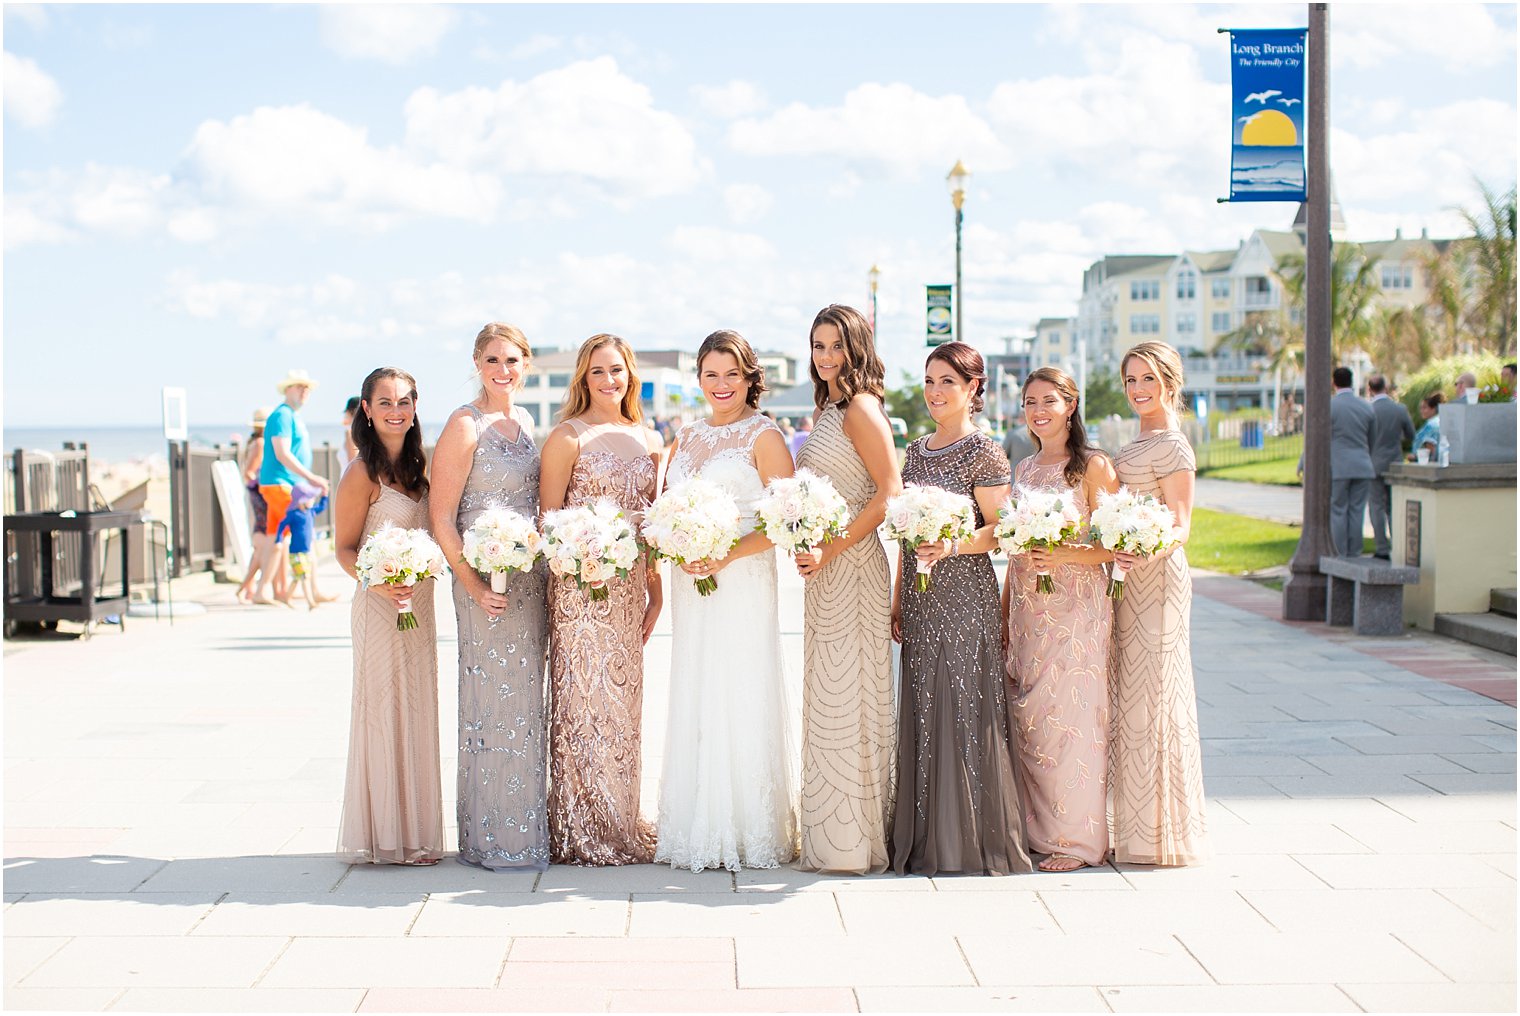 Gatsby inspired bridesmaid gowns photographed by Idalia Photography in Long Branch, NJ